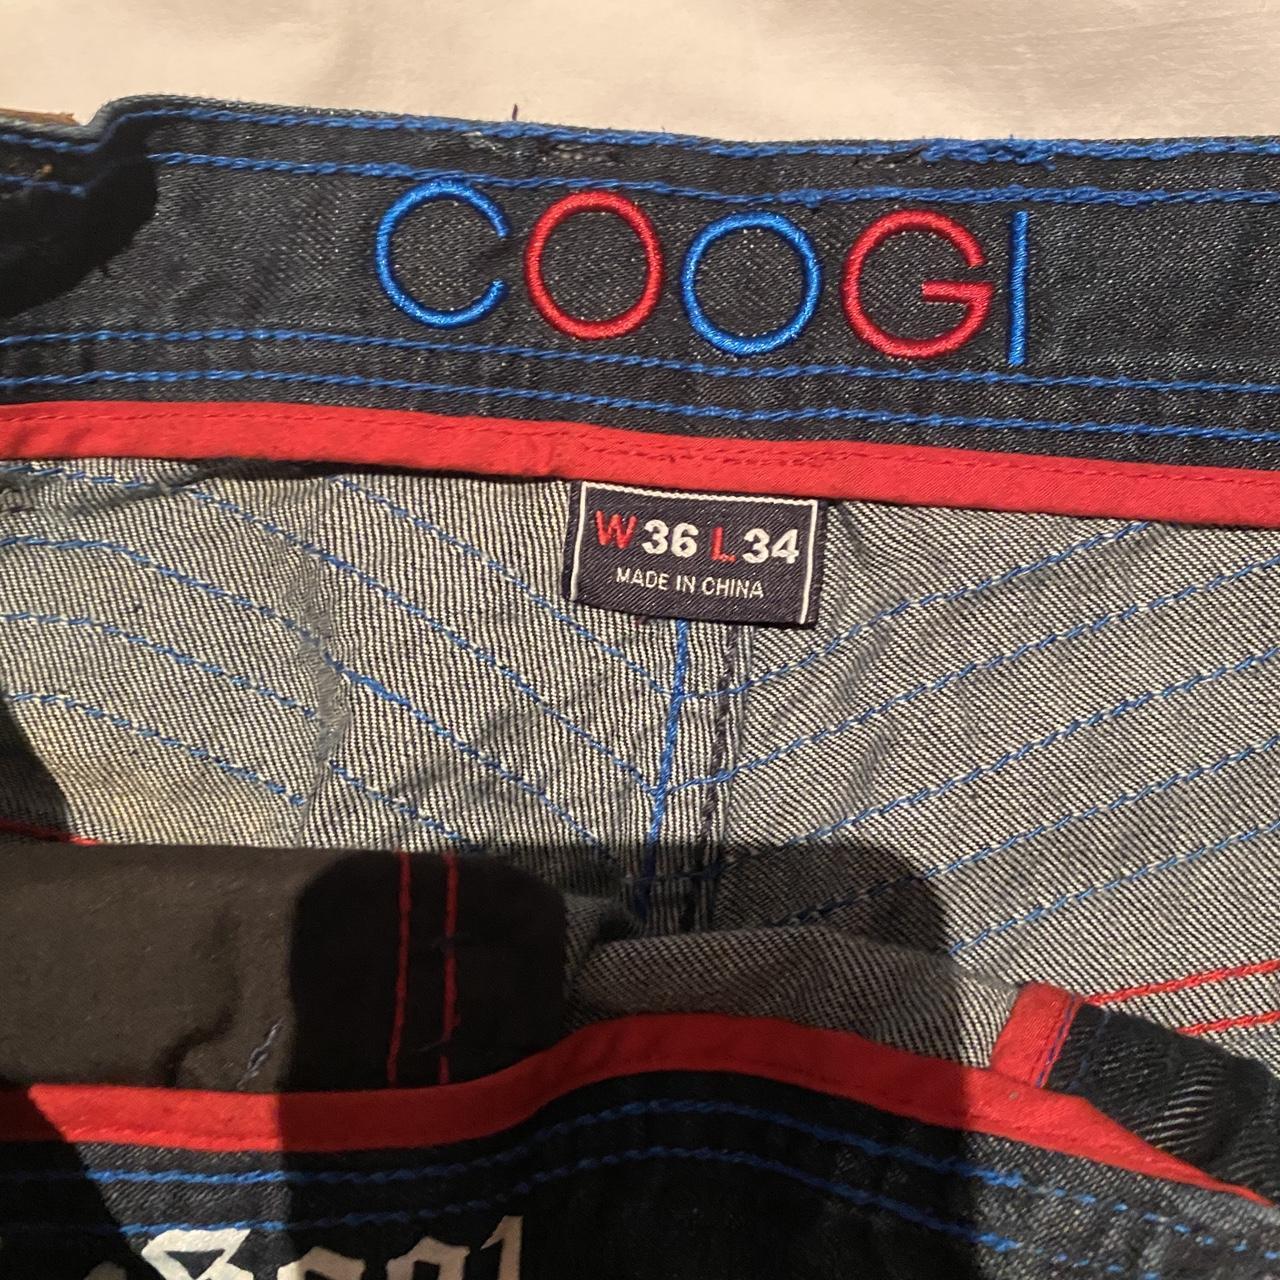 Coogi Men's Black and Yellow Jeans (4)